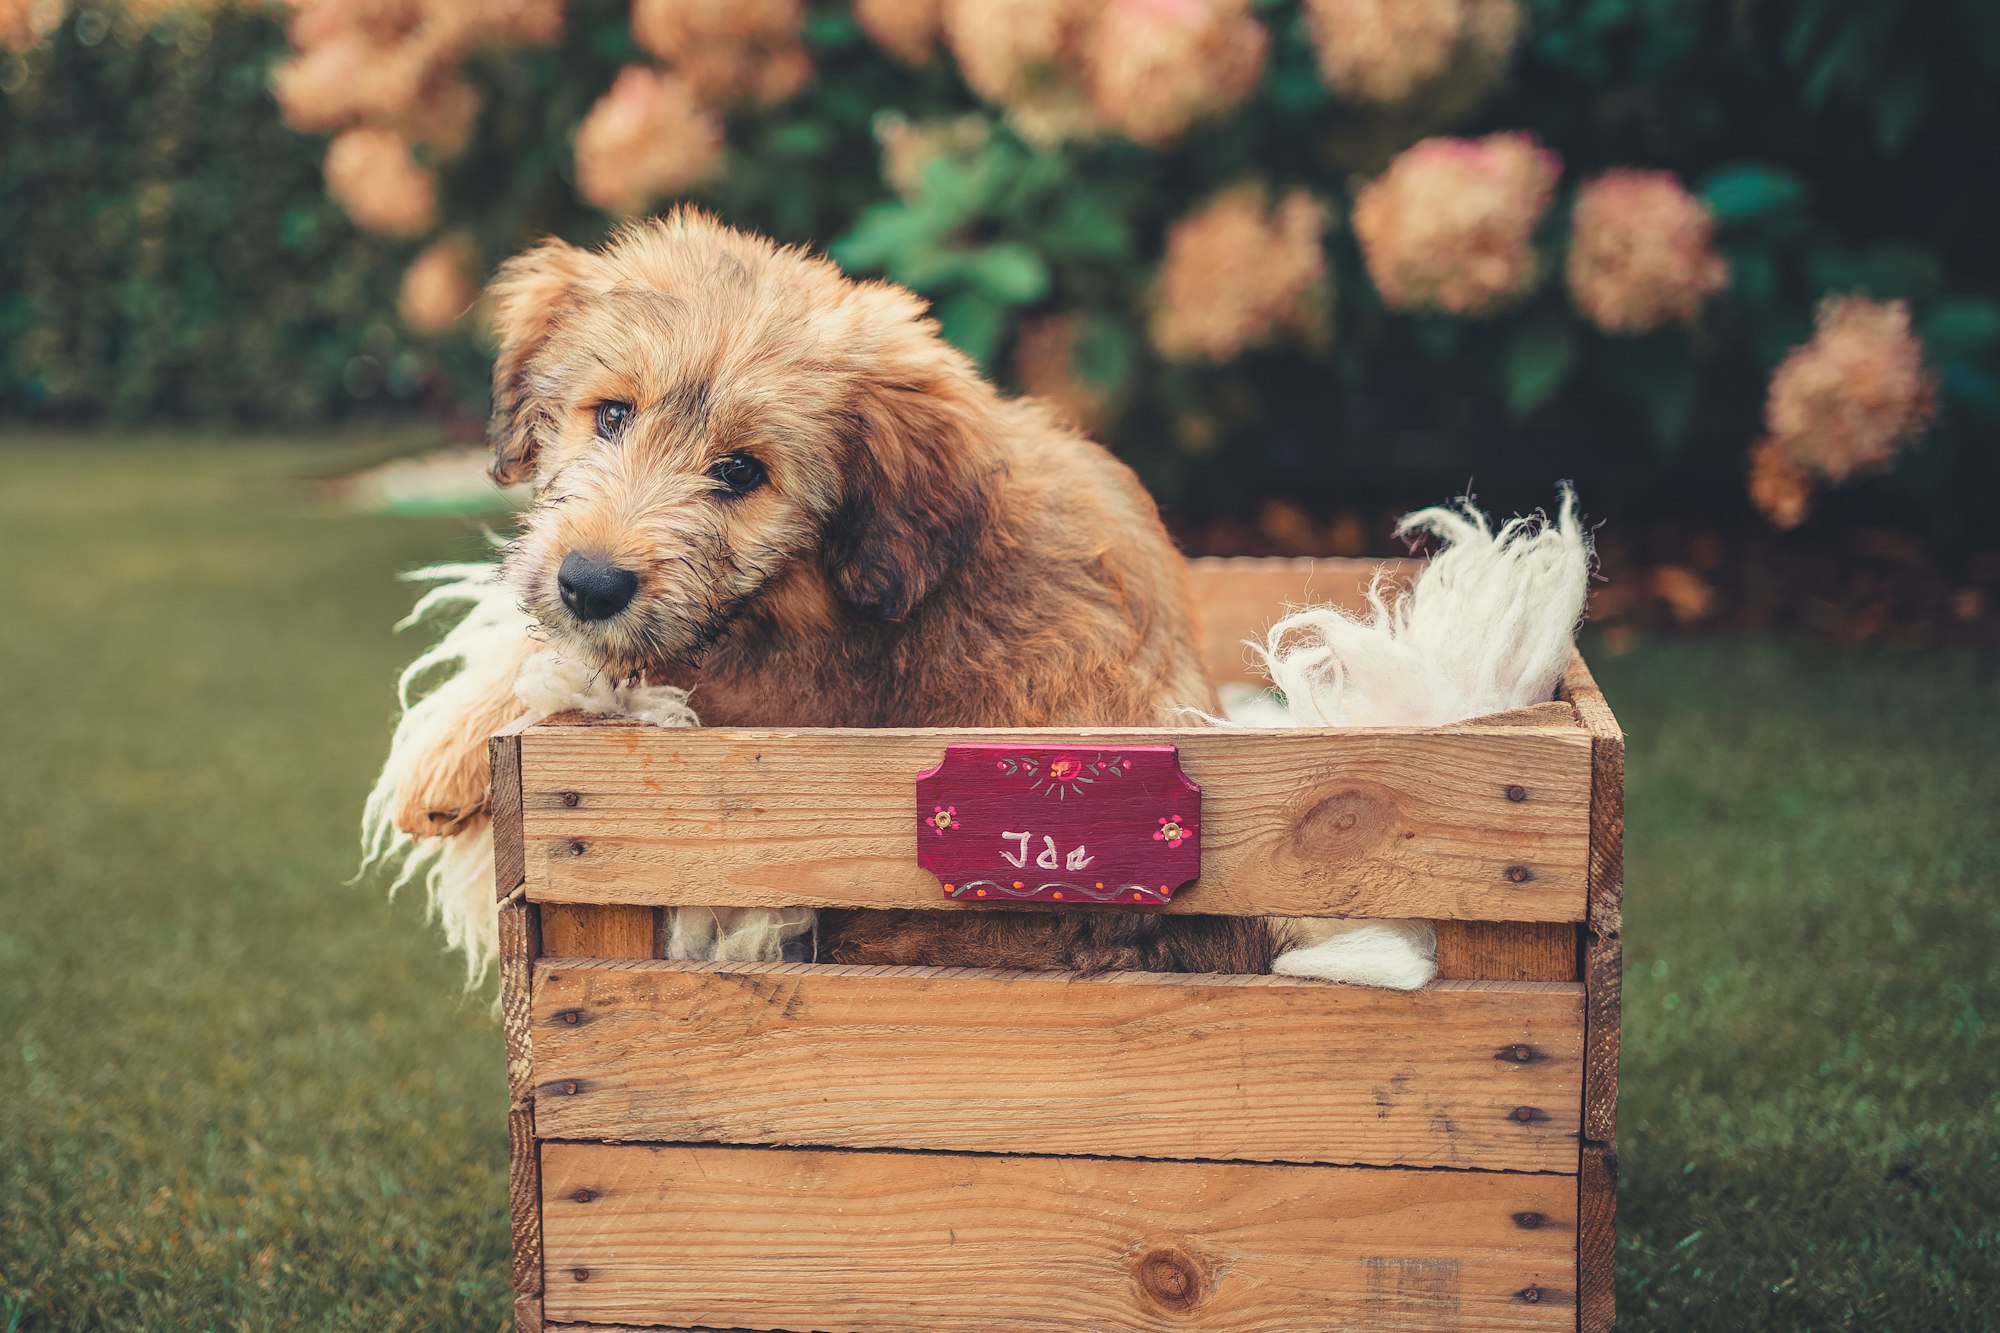 a small dog sitting in a wooden crate